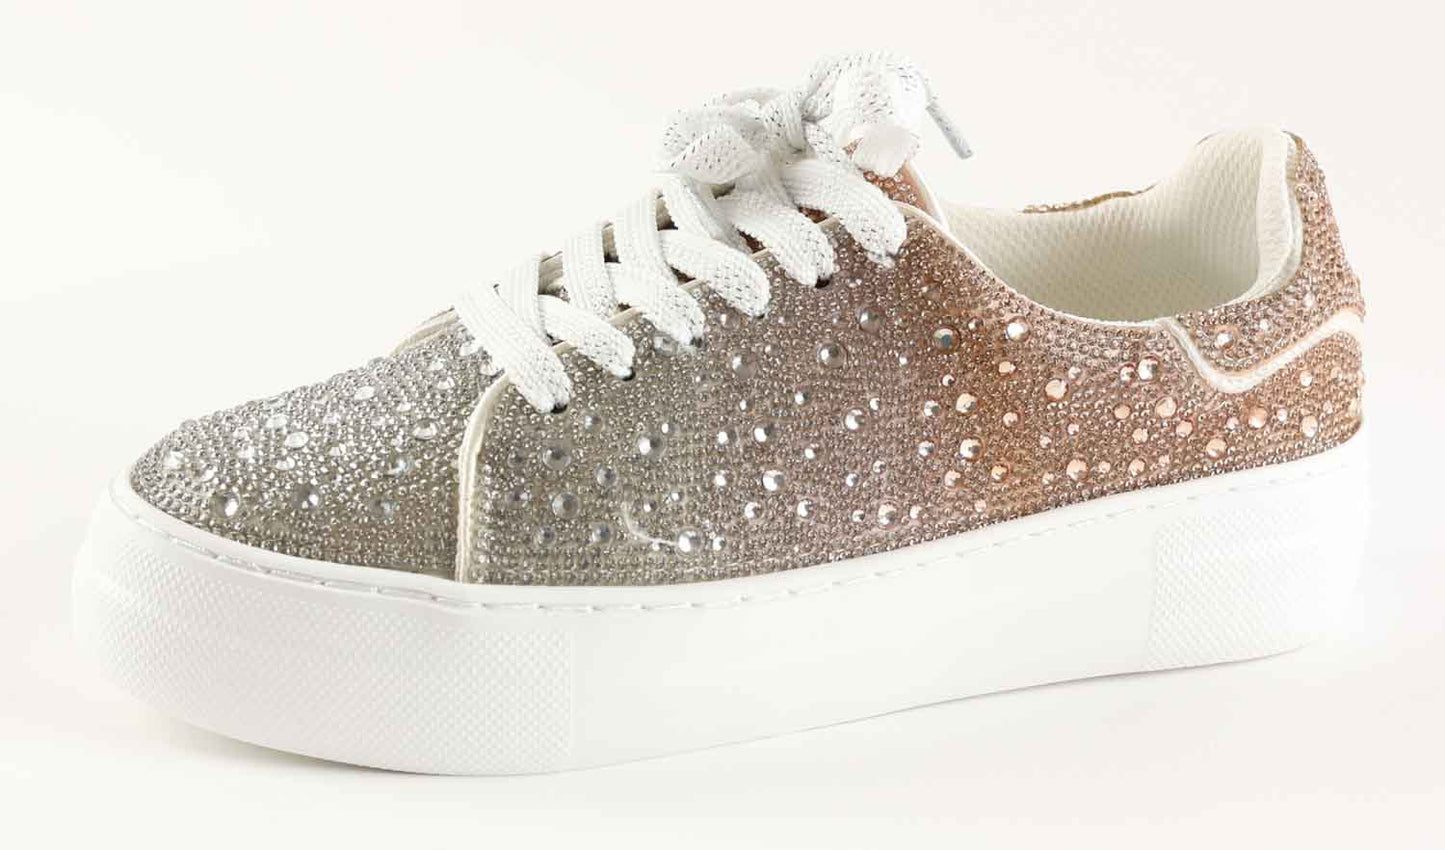 Bedazzle Sneakers by Hey Girl - Corky's